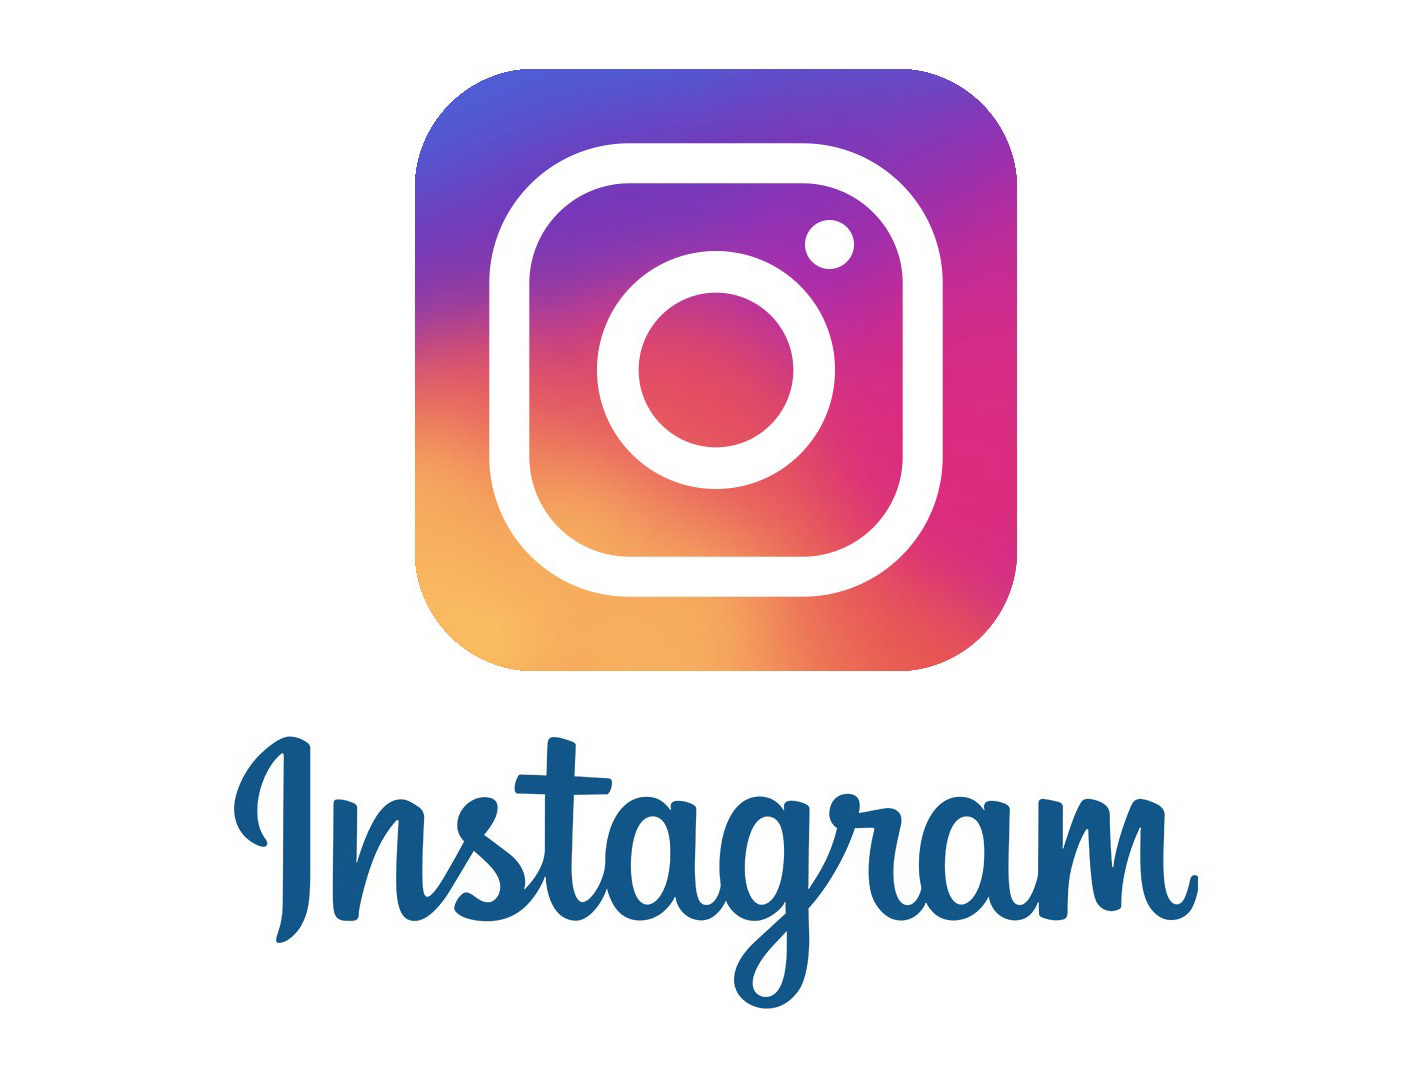 Instagram-logo-with-text